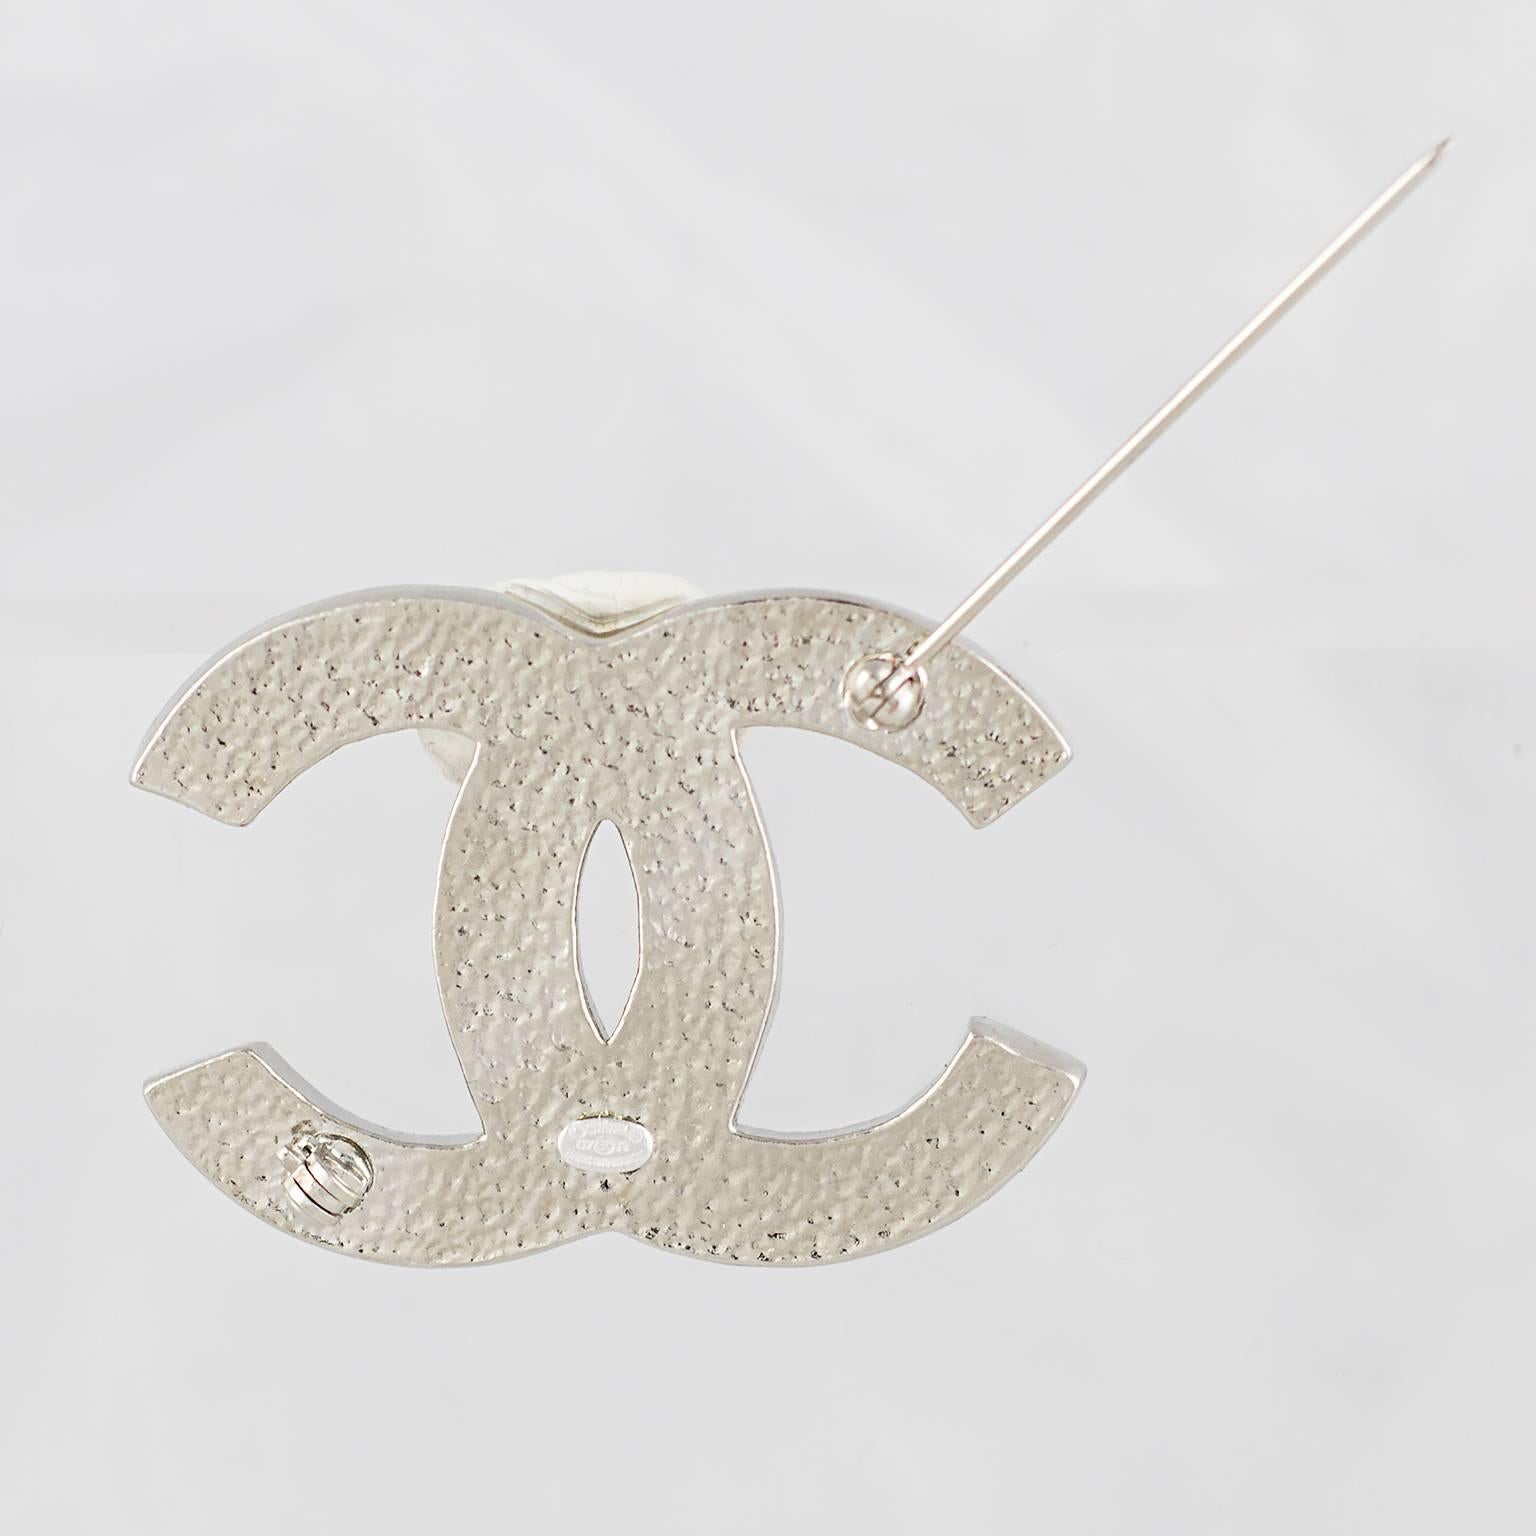 Chanel CC Logo Brooch with Crystal Detailing.
Made in France for the 2007 Autumn Collection.